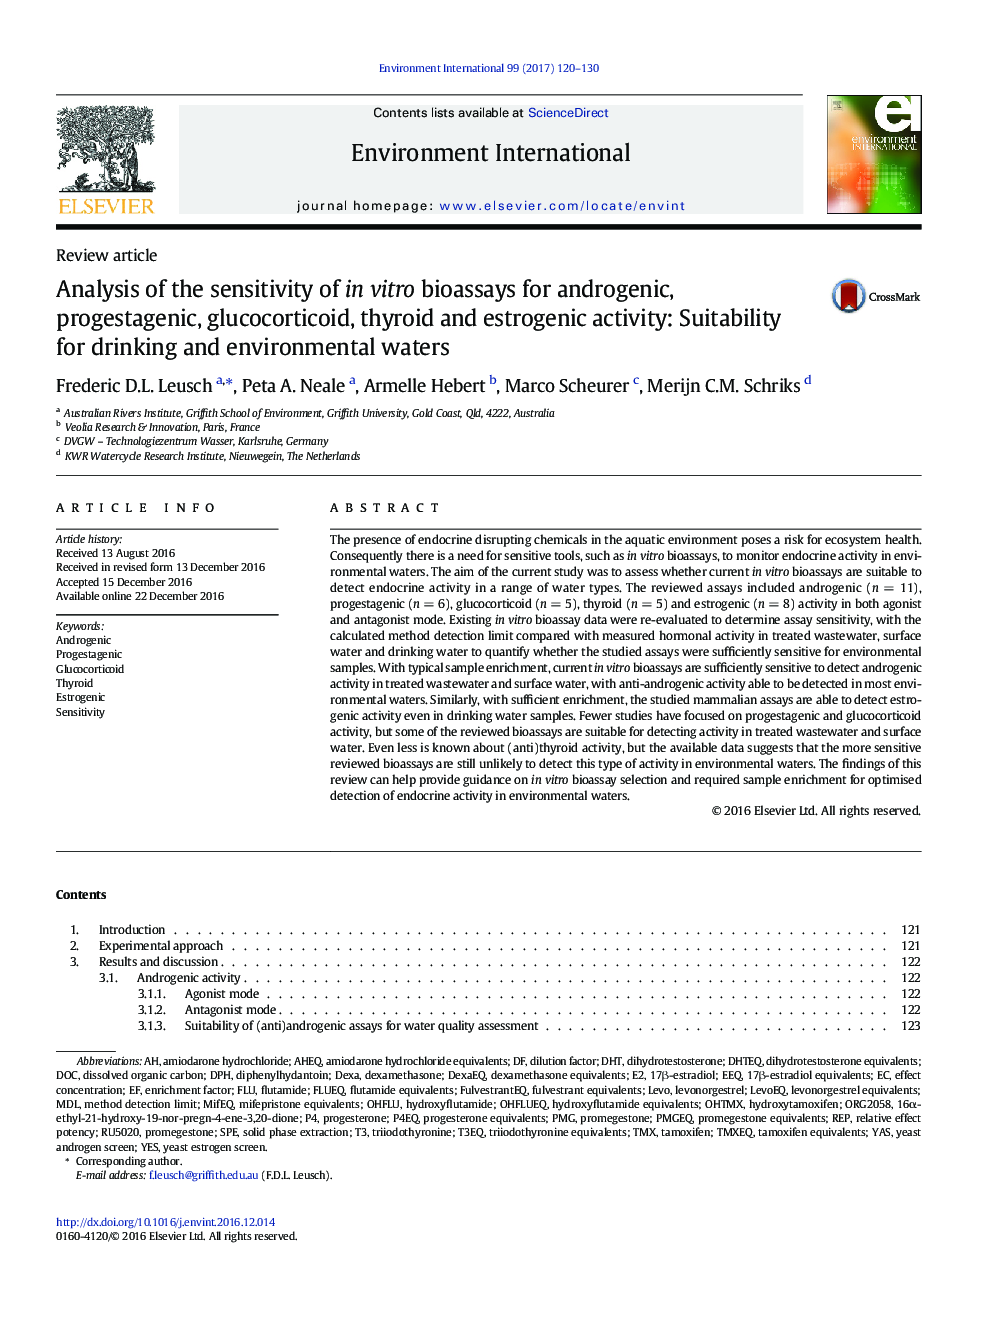 Review articleAnalysis of the sensitivity of in vitro bioassays for androgenic, progestagenic, glucocorticoid, thyroid and estrogenic activity: Suitability for drinking and environmental waters